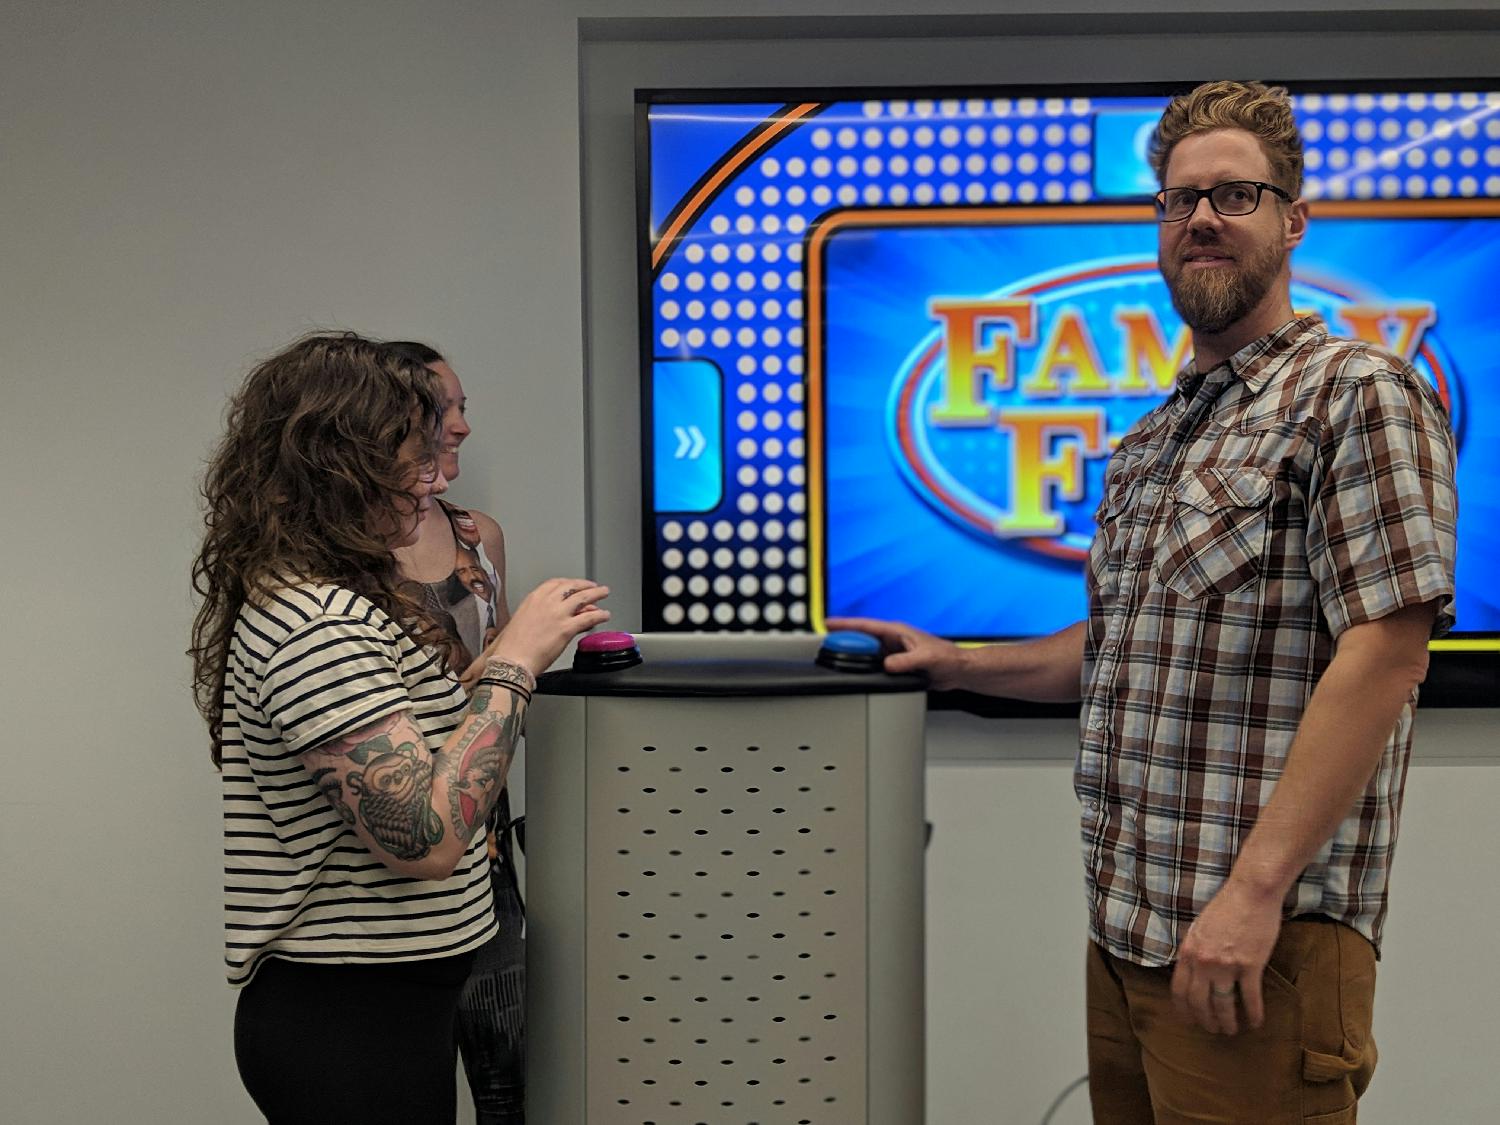 Here our Communications Designer Becki faces off with Technical Lead Pearson in a Family Feud style match-up.